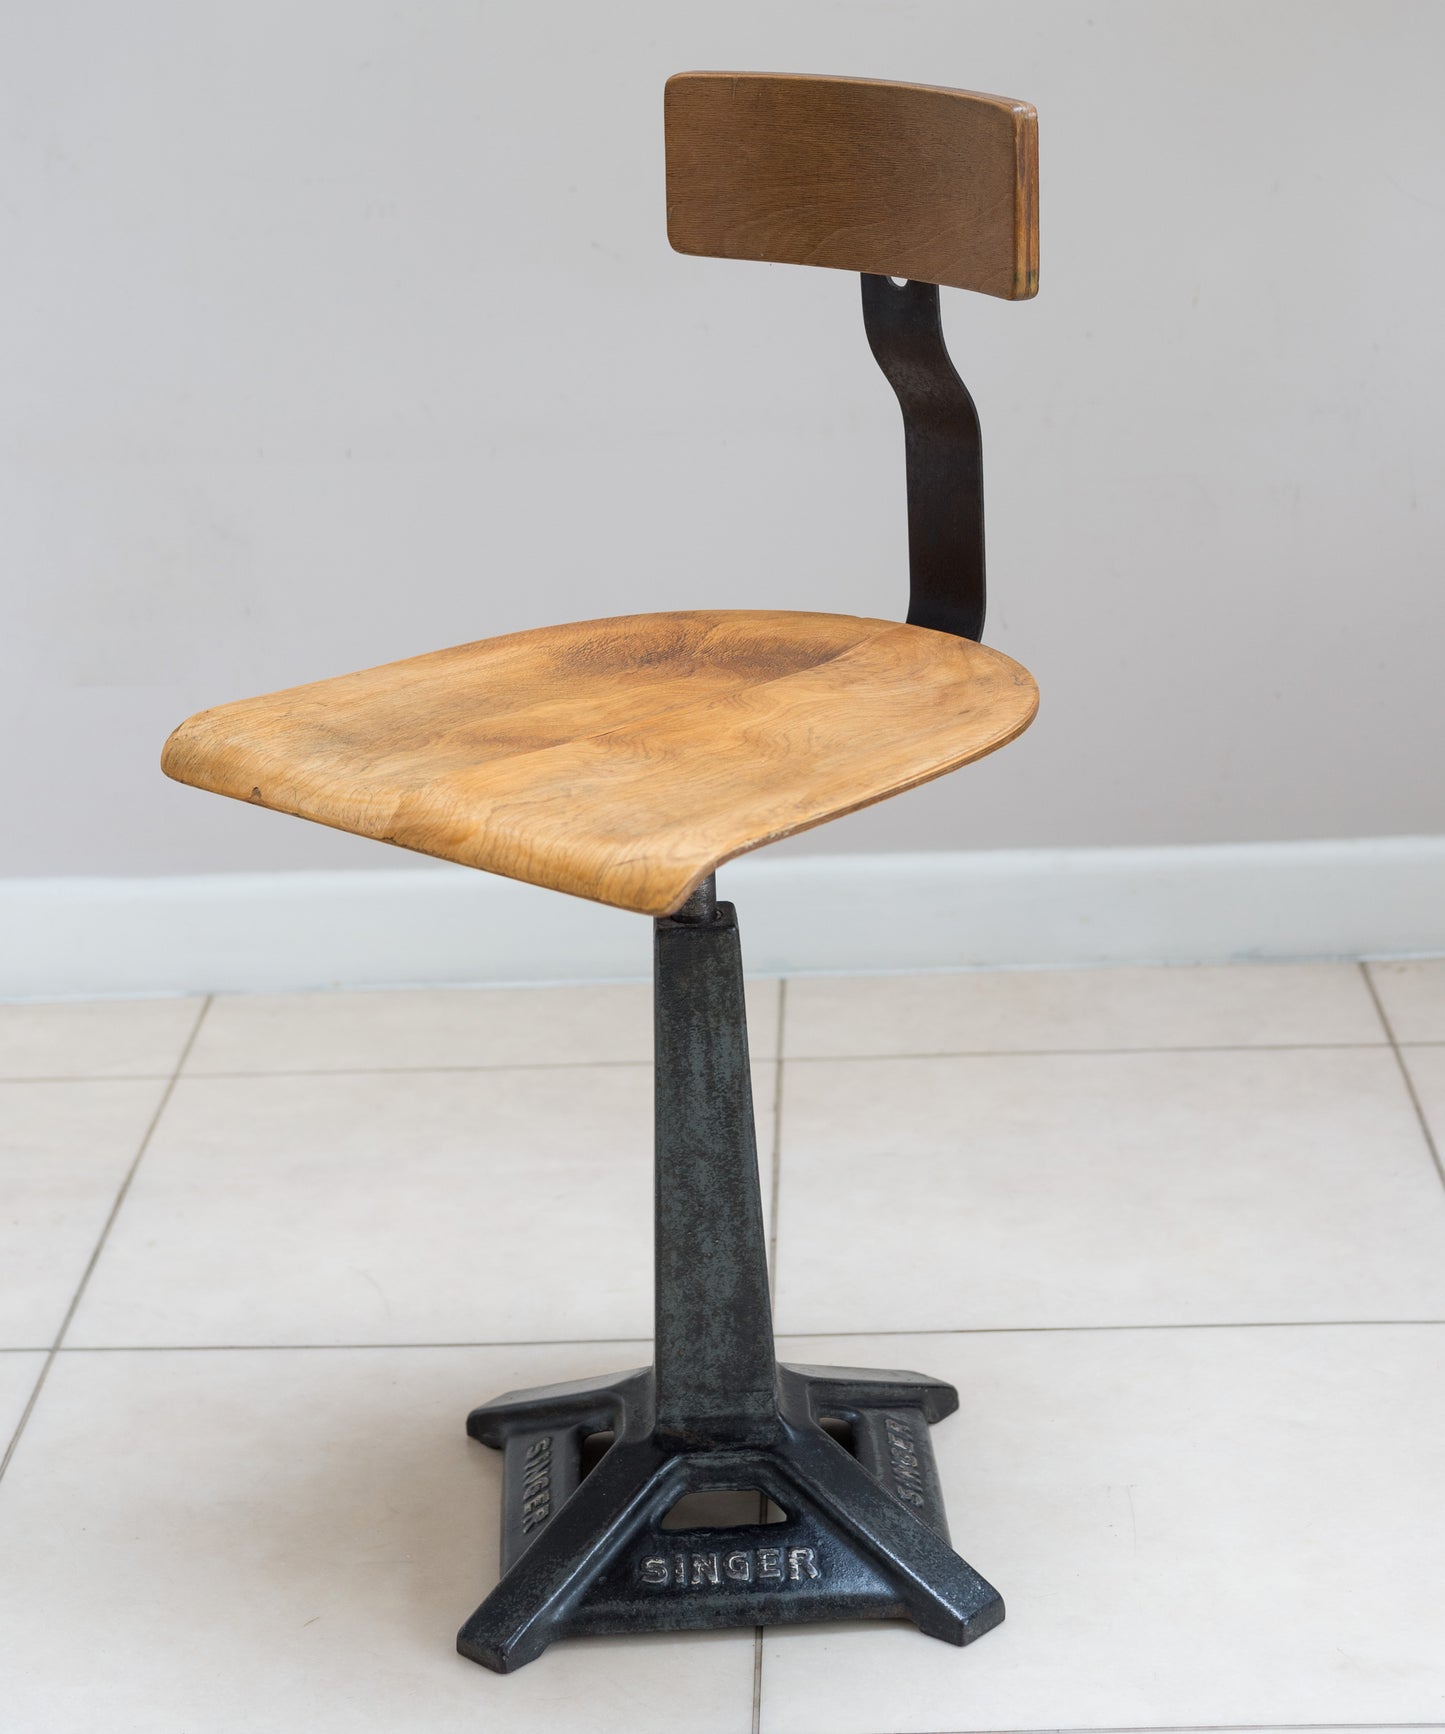 Singer Machinist Or Work Stool/Chair. 1930s English